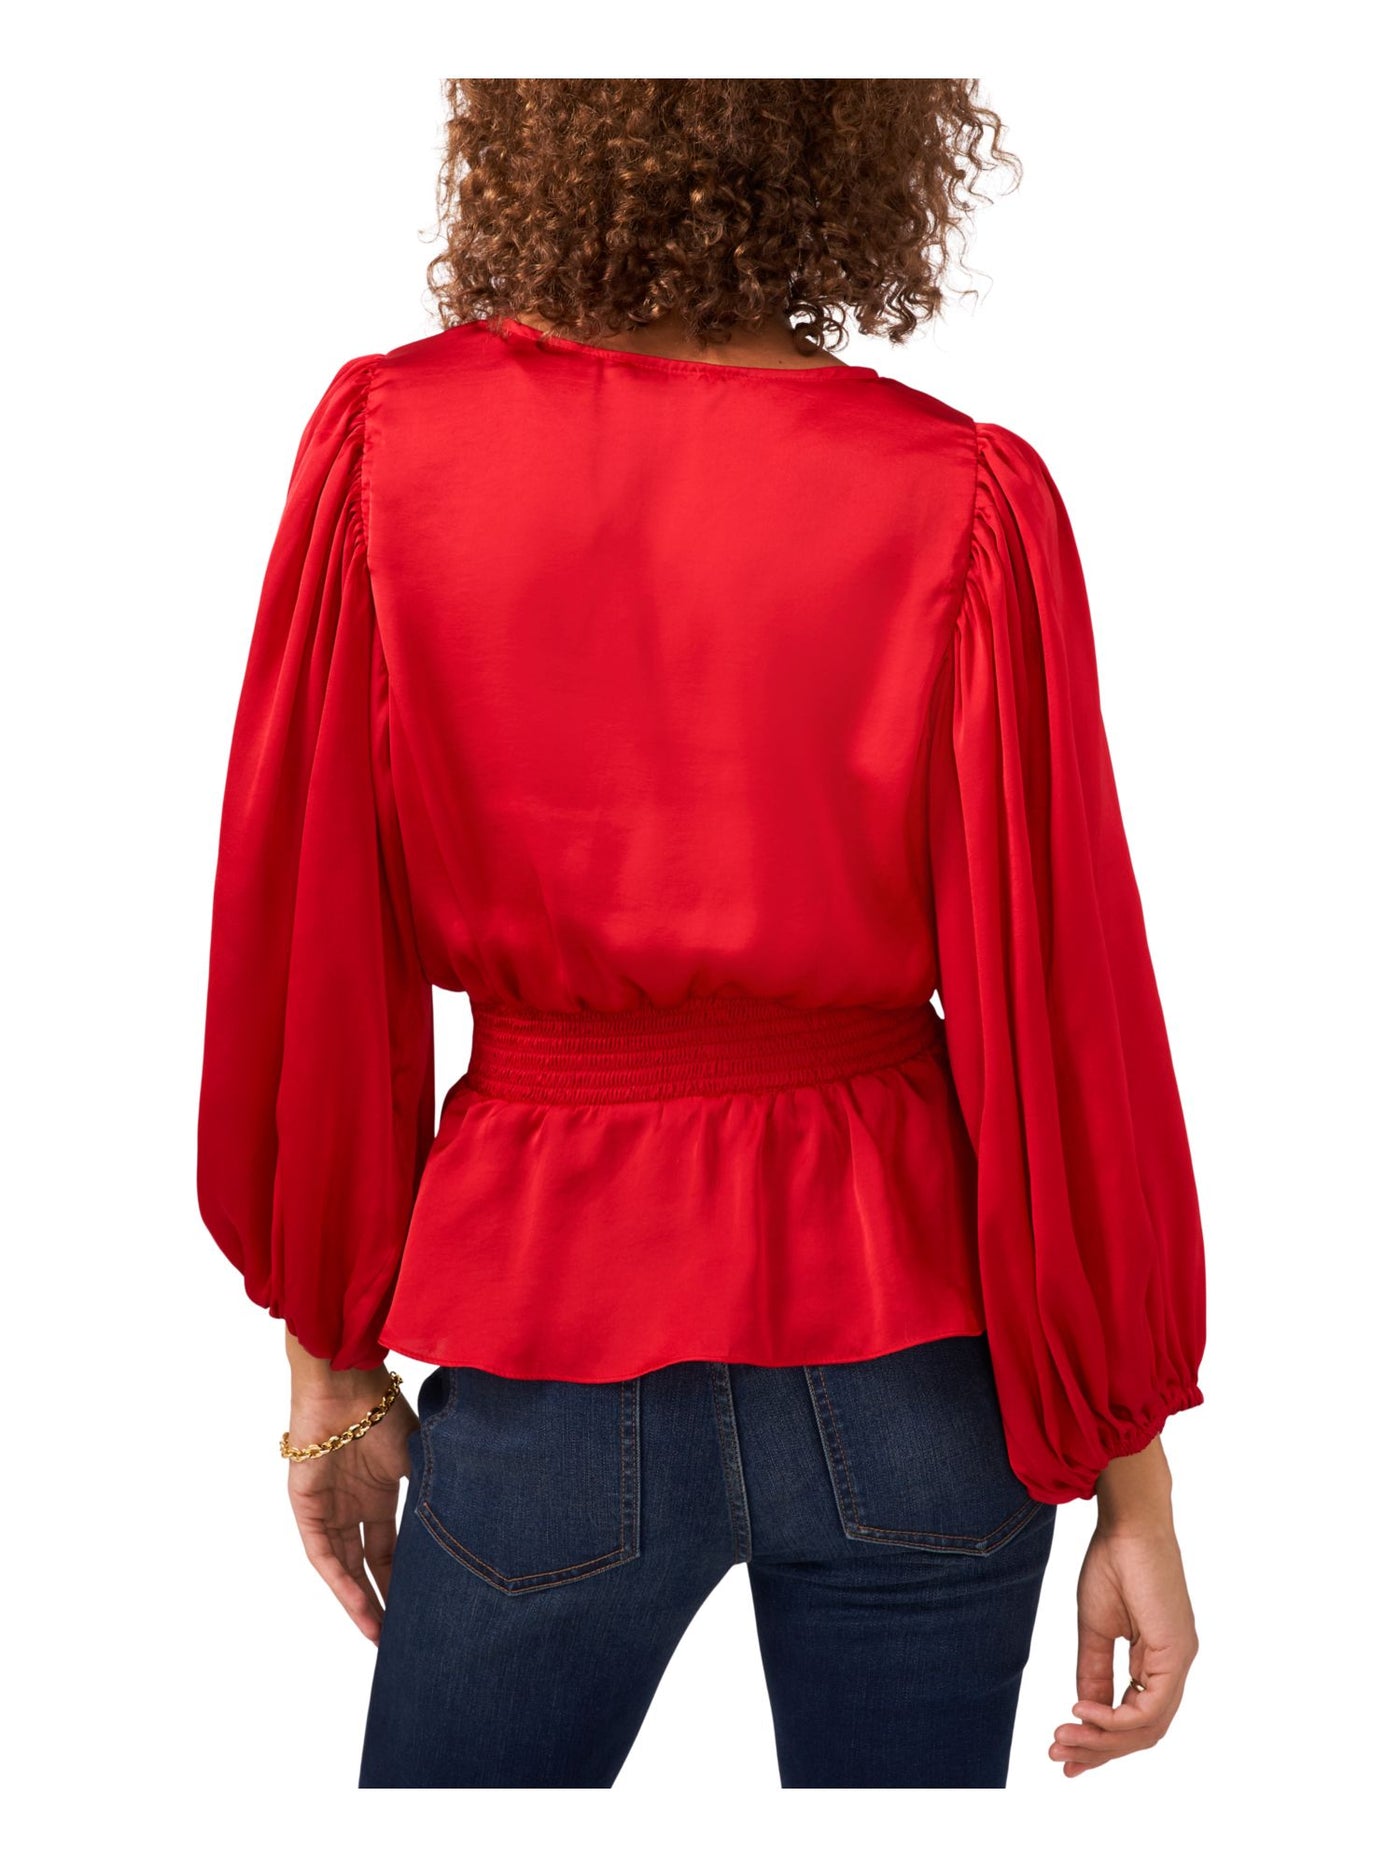 VINCE CAMUTO Womens Red Smocked Pleated Balloon Sleeve V Neck Wear To Work Peplum Top XS